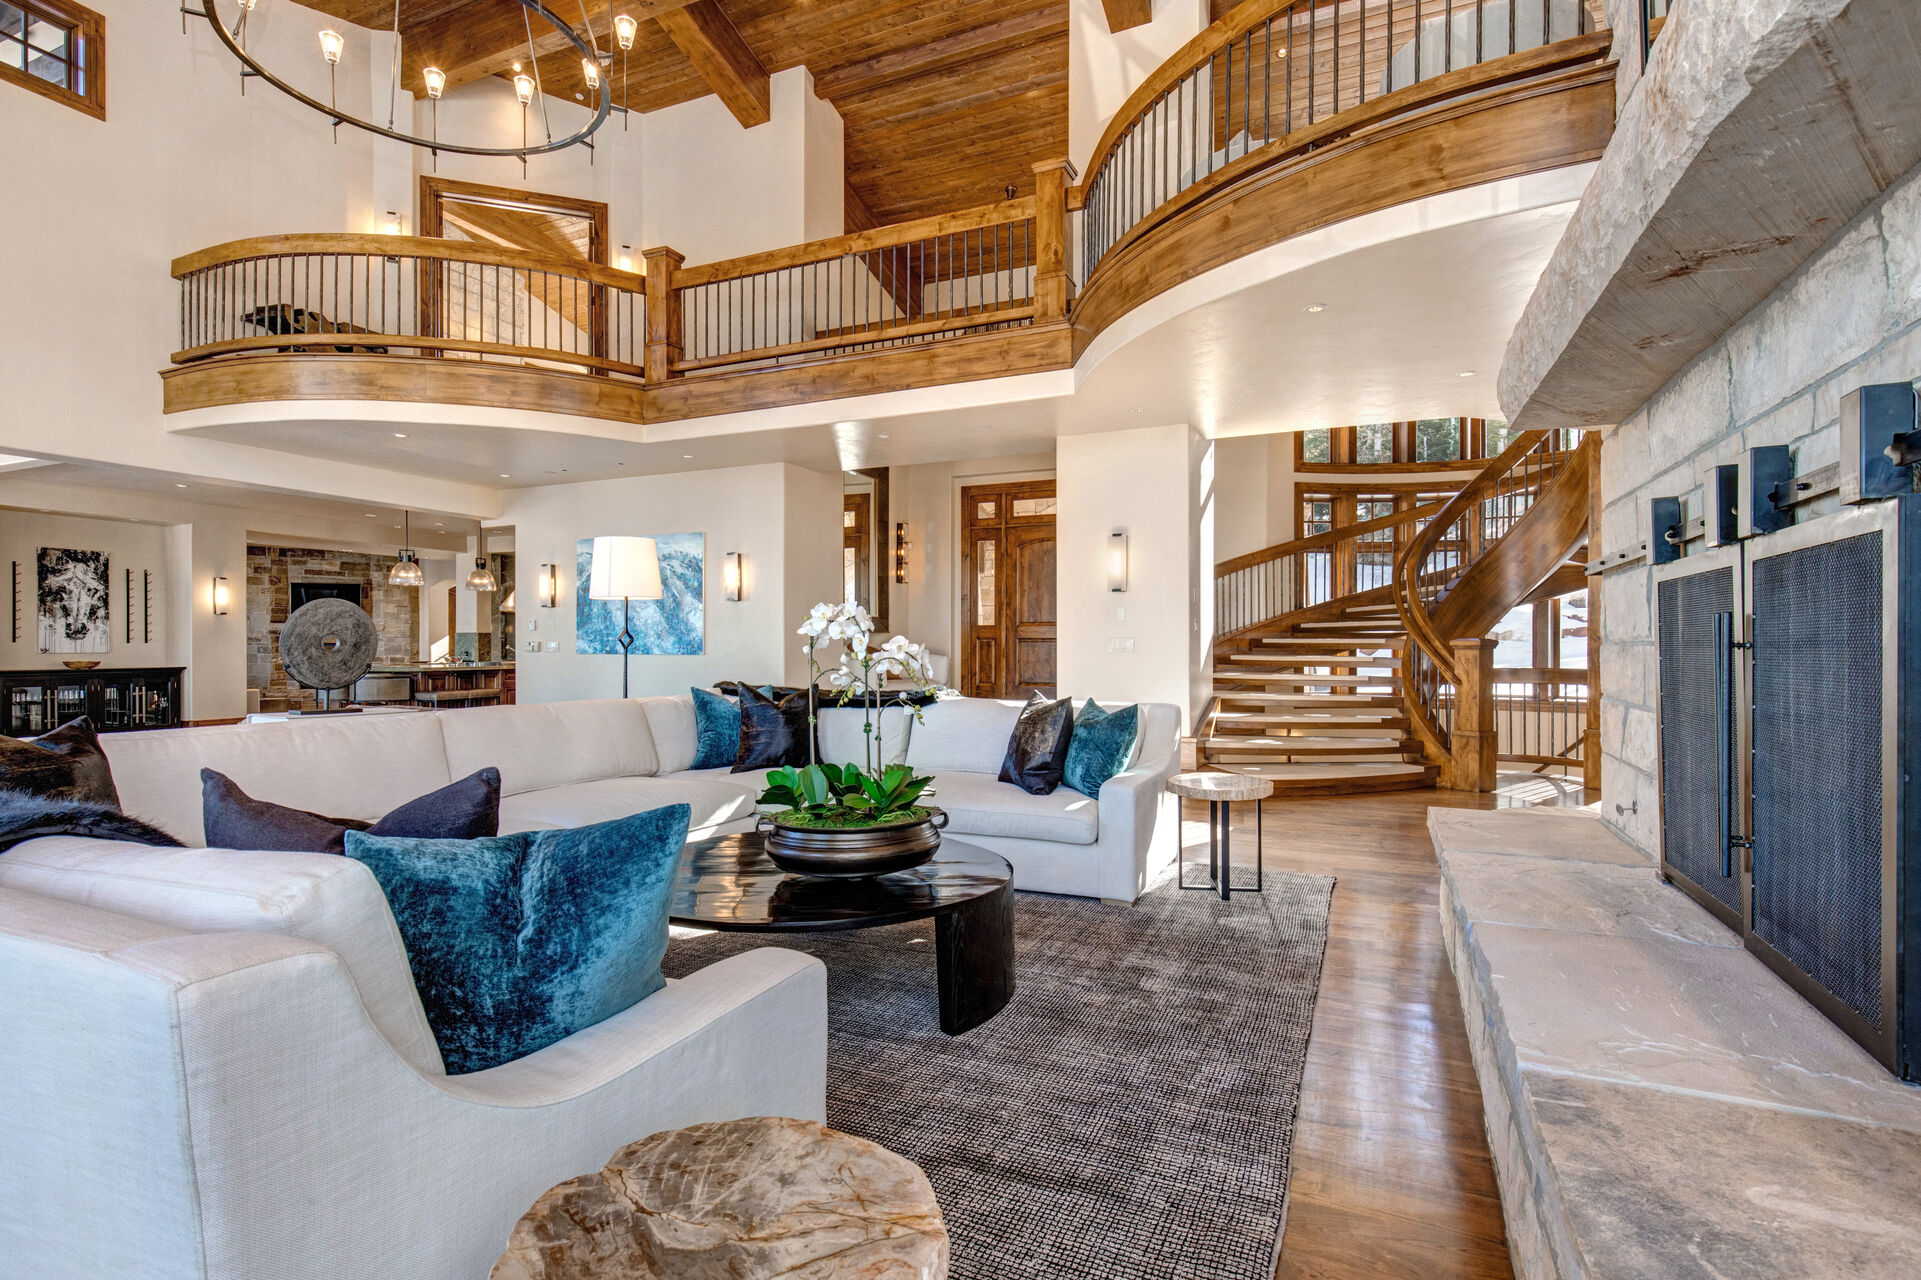 Enormous Upper Living Room with three separate sitting areas. This room provides ample seating, large wood-burning fireplace, and private, recently remodeled, sun-deck access